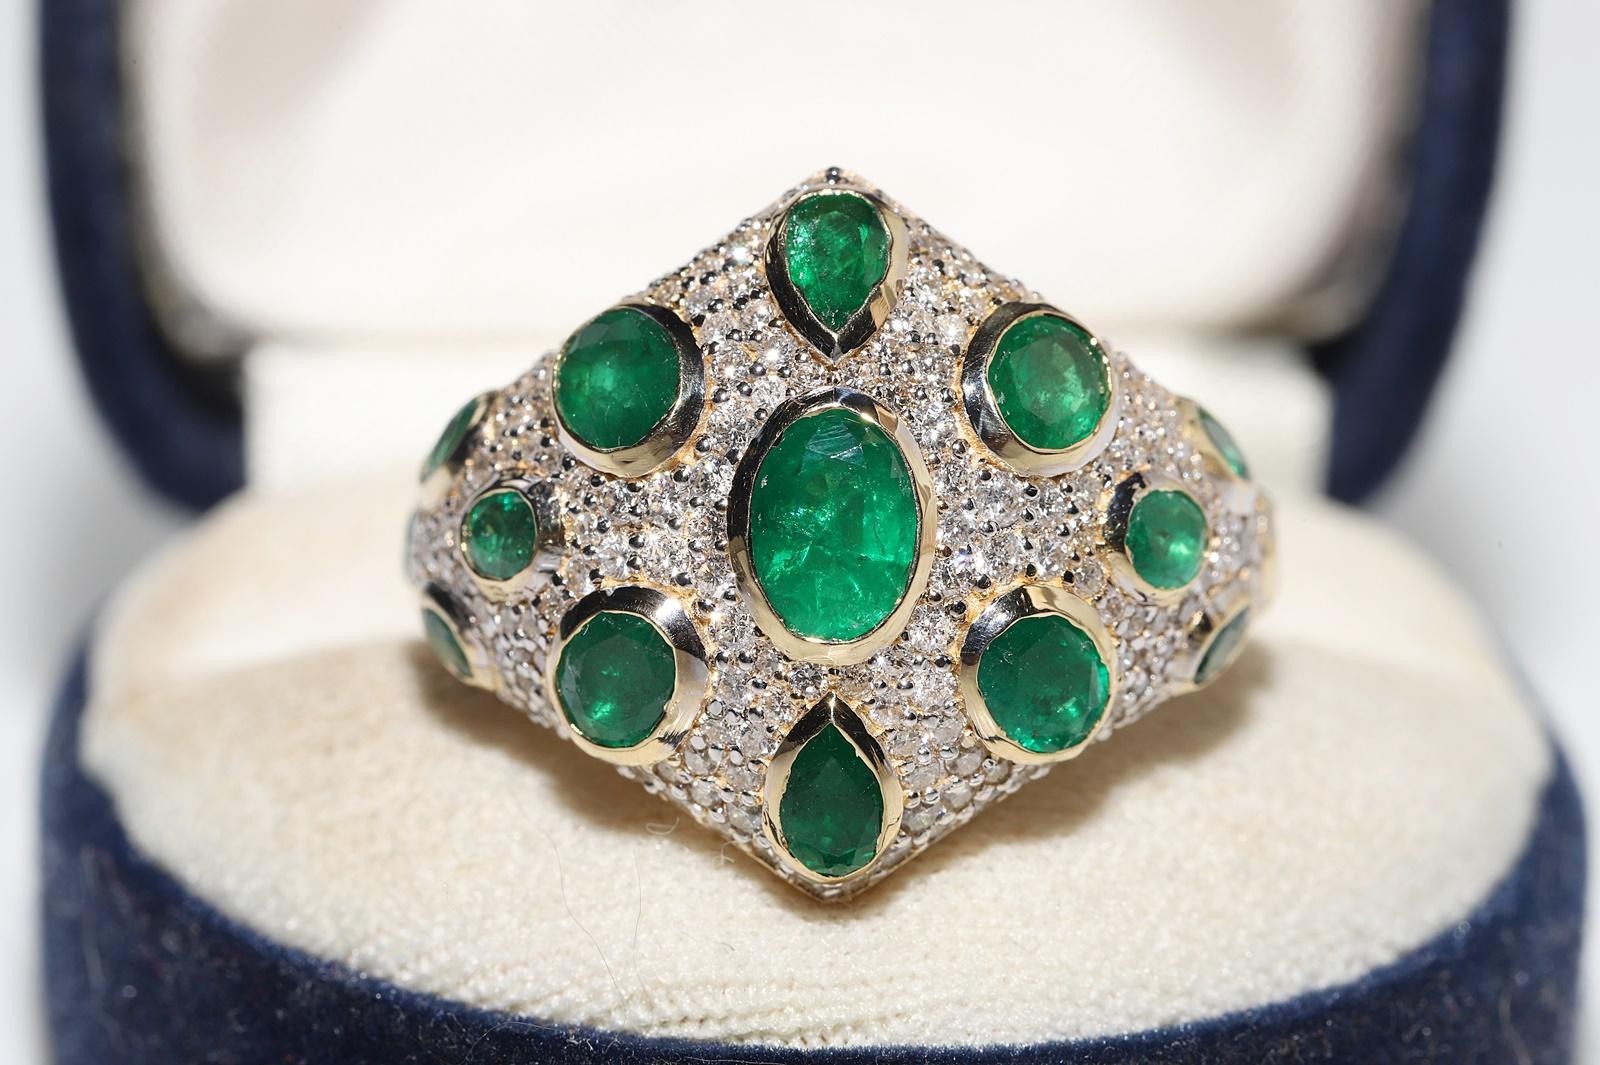 In very good condition.
Total weight is 10 grams.
Totally is diamond 2 ct.
The diamond is has G-H color and vvs-vs-s1 clarity.
Totally is emerald 5 ct.
Ring size is US 10 
We can make any size.
Box is not included.
Please contact for any questions.